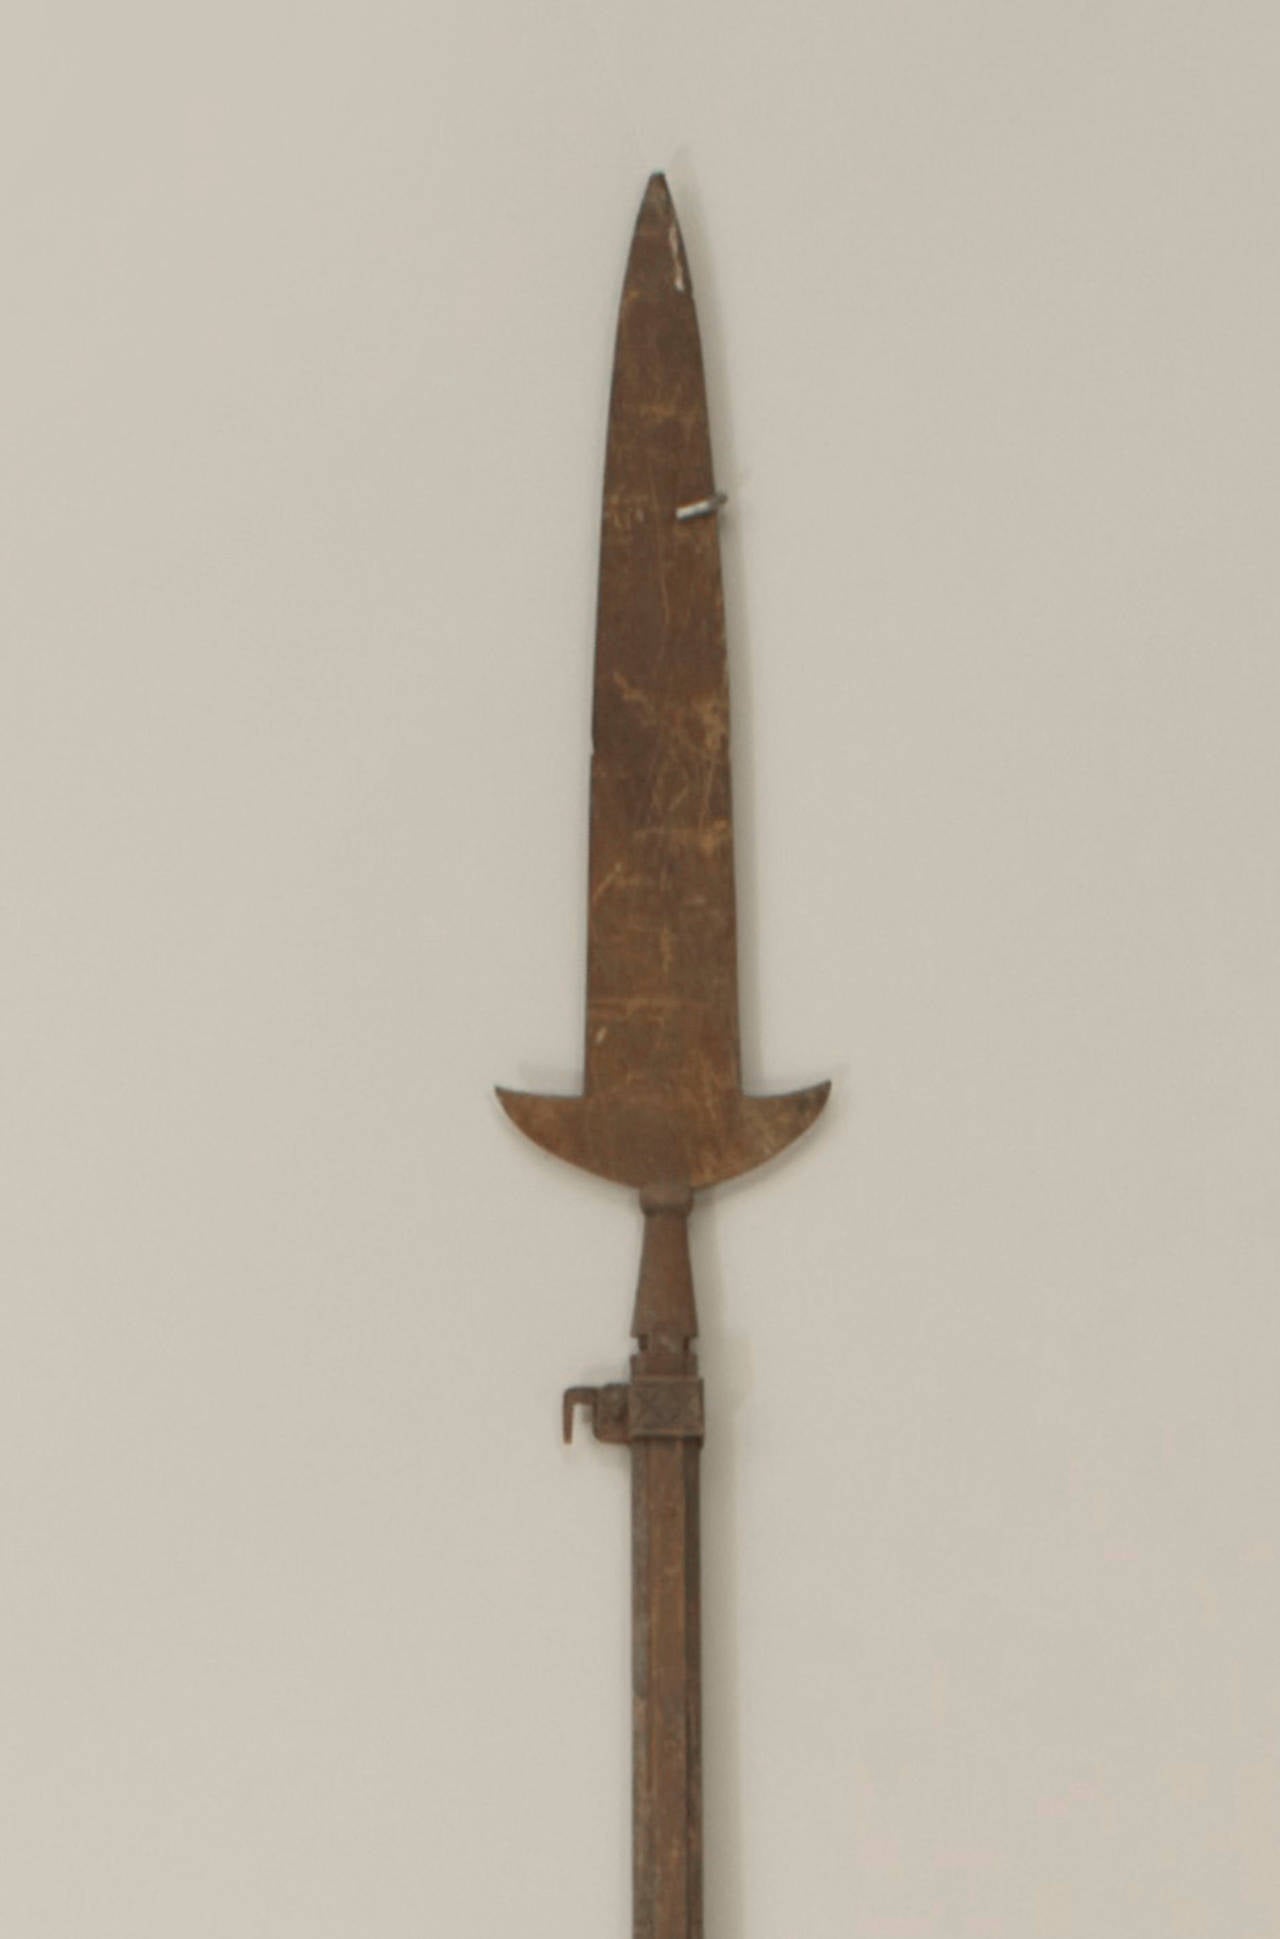 English Renaissance-style spear with simple wooden shaft and 32-inch iron blade.
